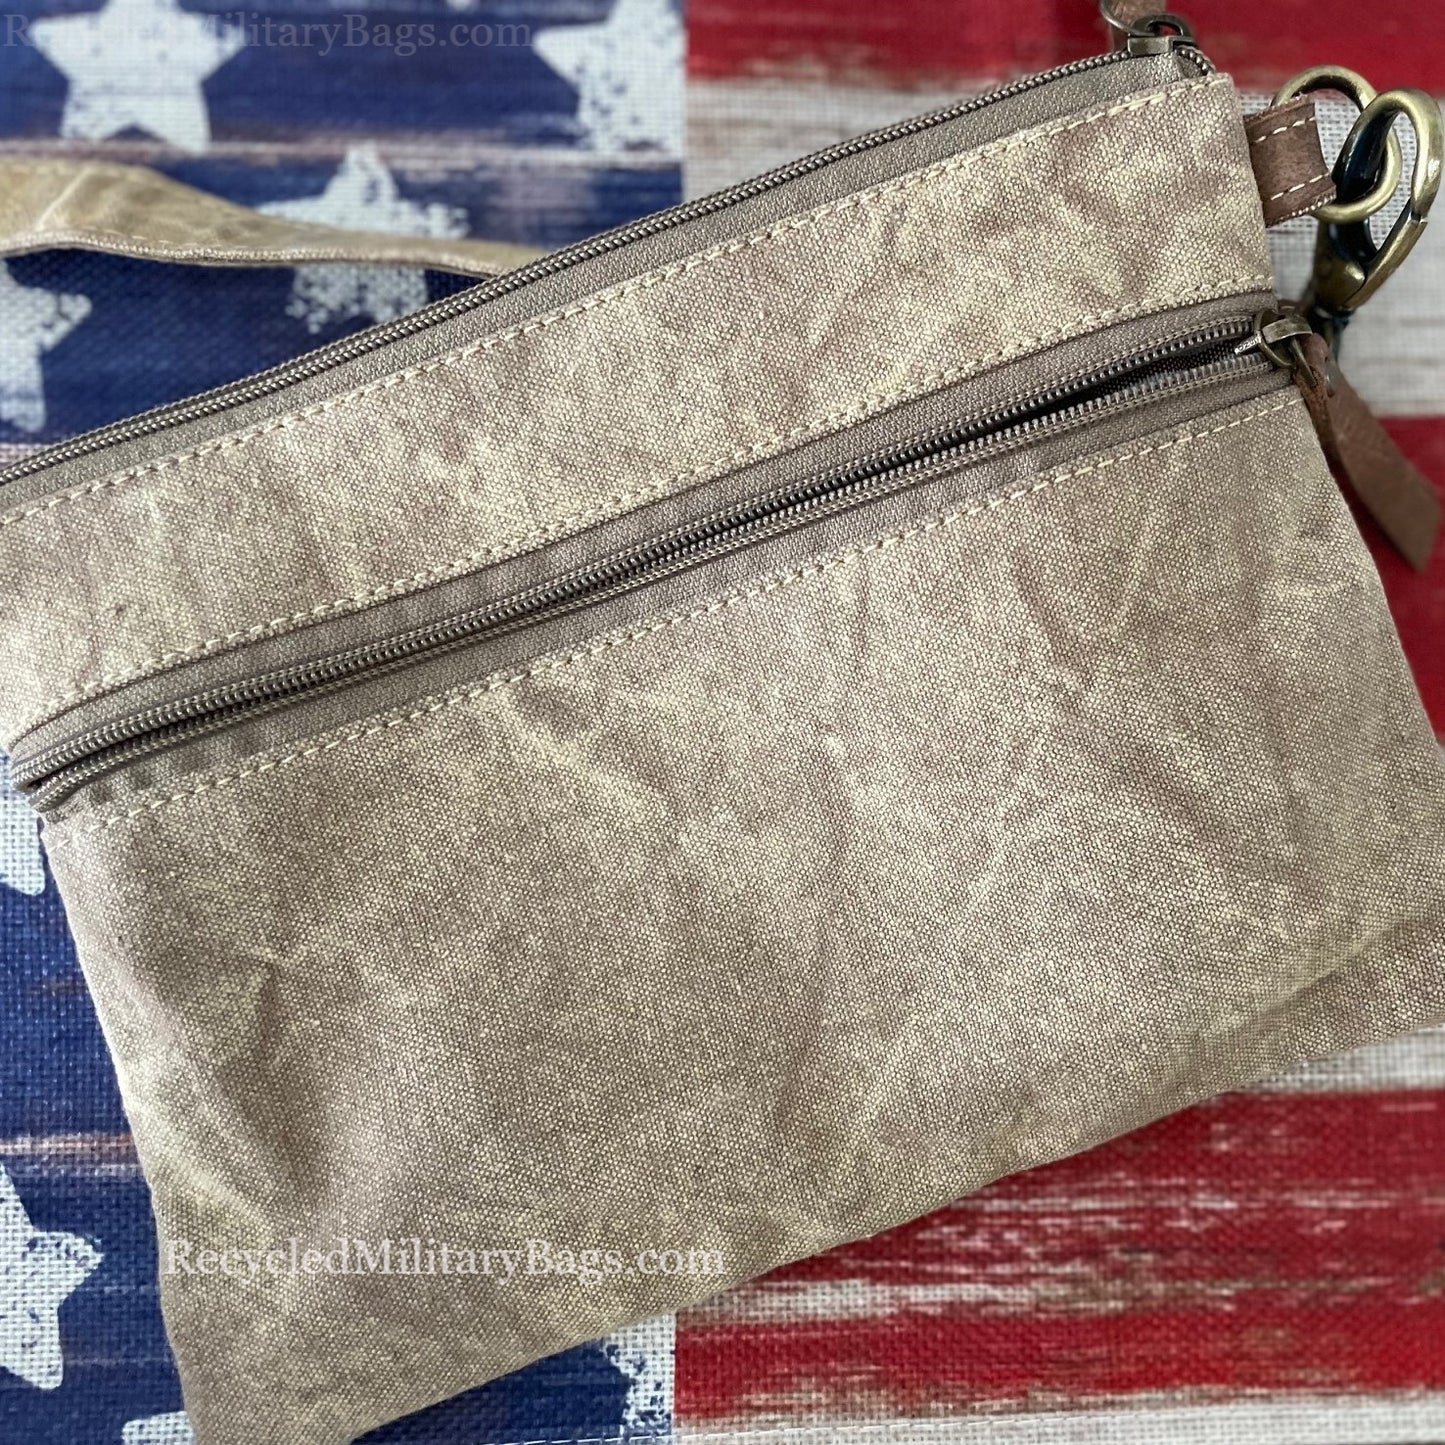 Peace and Liberty Canvas Crossbody Bag ~ Peace Patience and Kindness at it's Best!